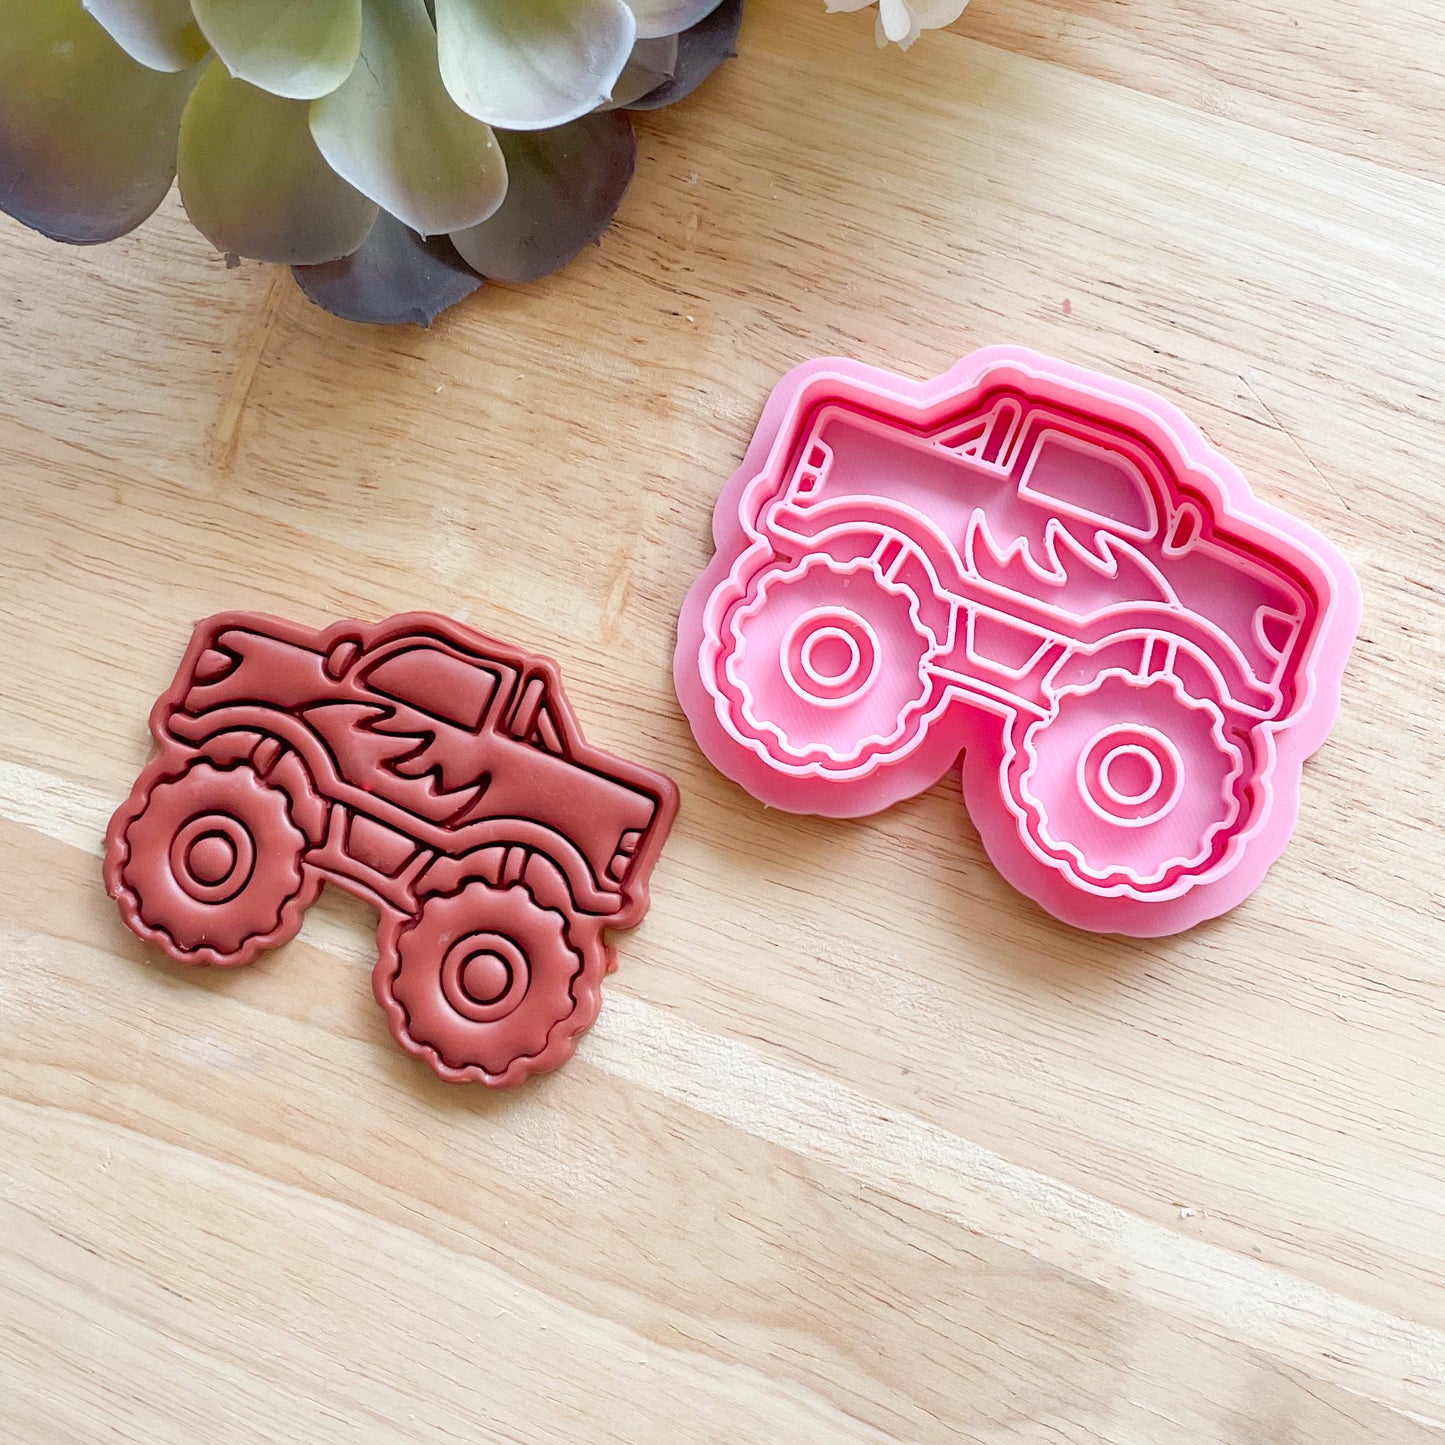 "Monster Truck #2" - Cookie Cutter & Stamp